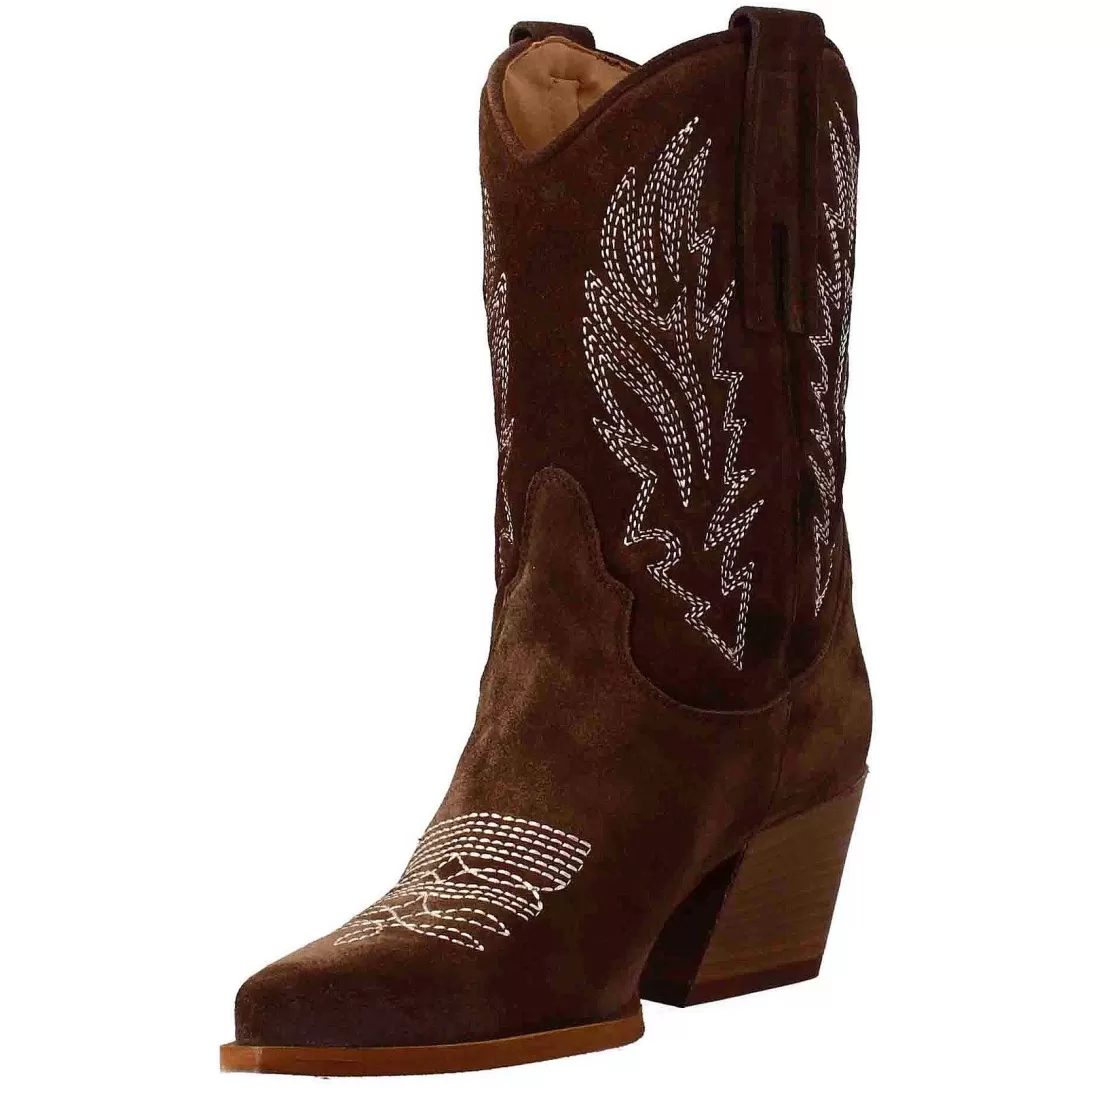 Leonardo Women'S Low Texan Boots In Dark Brown Suede With Embroidery. Sale